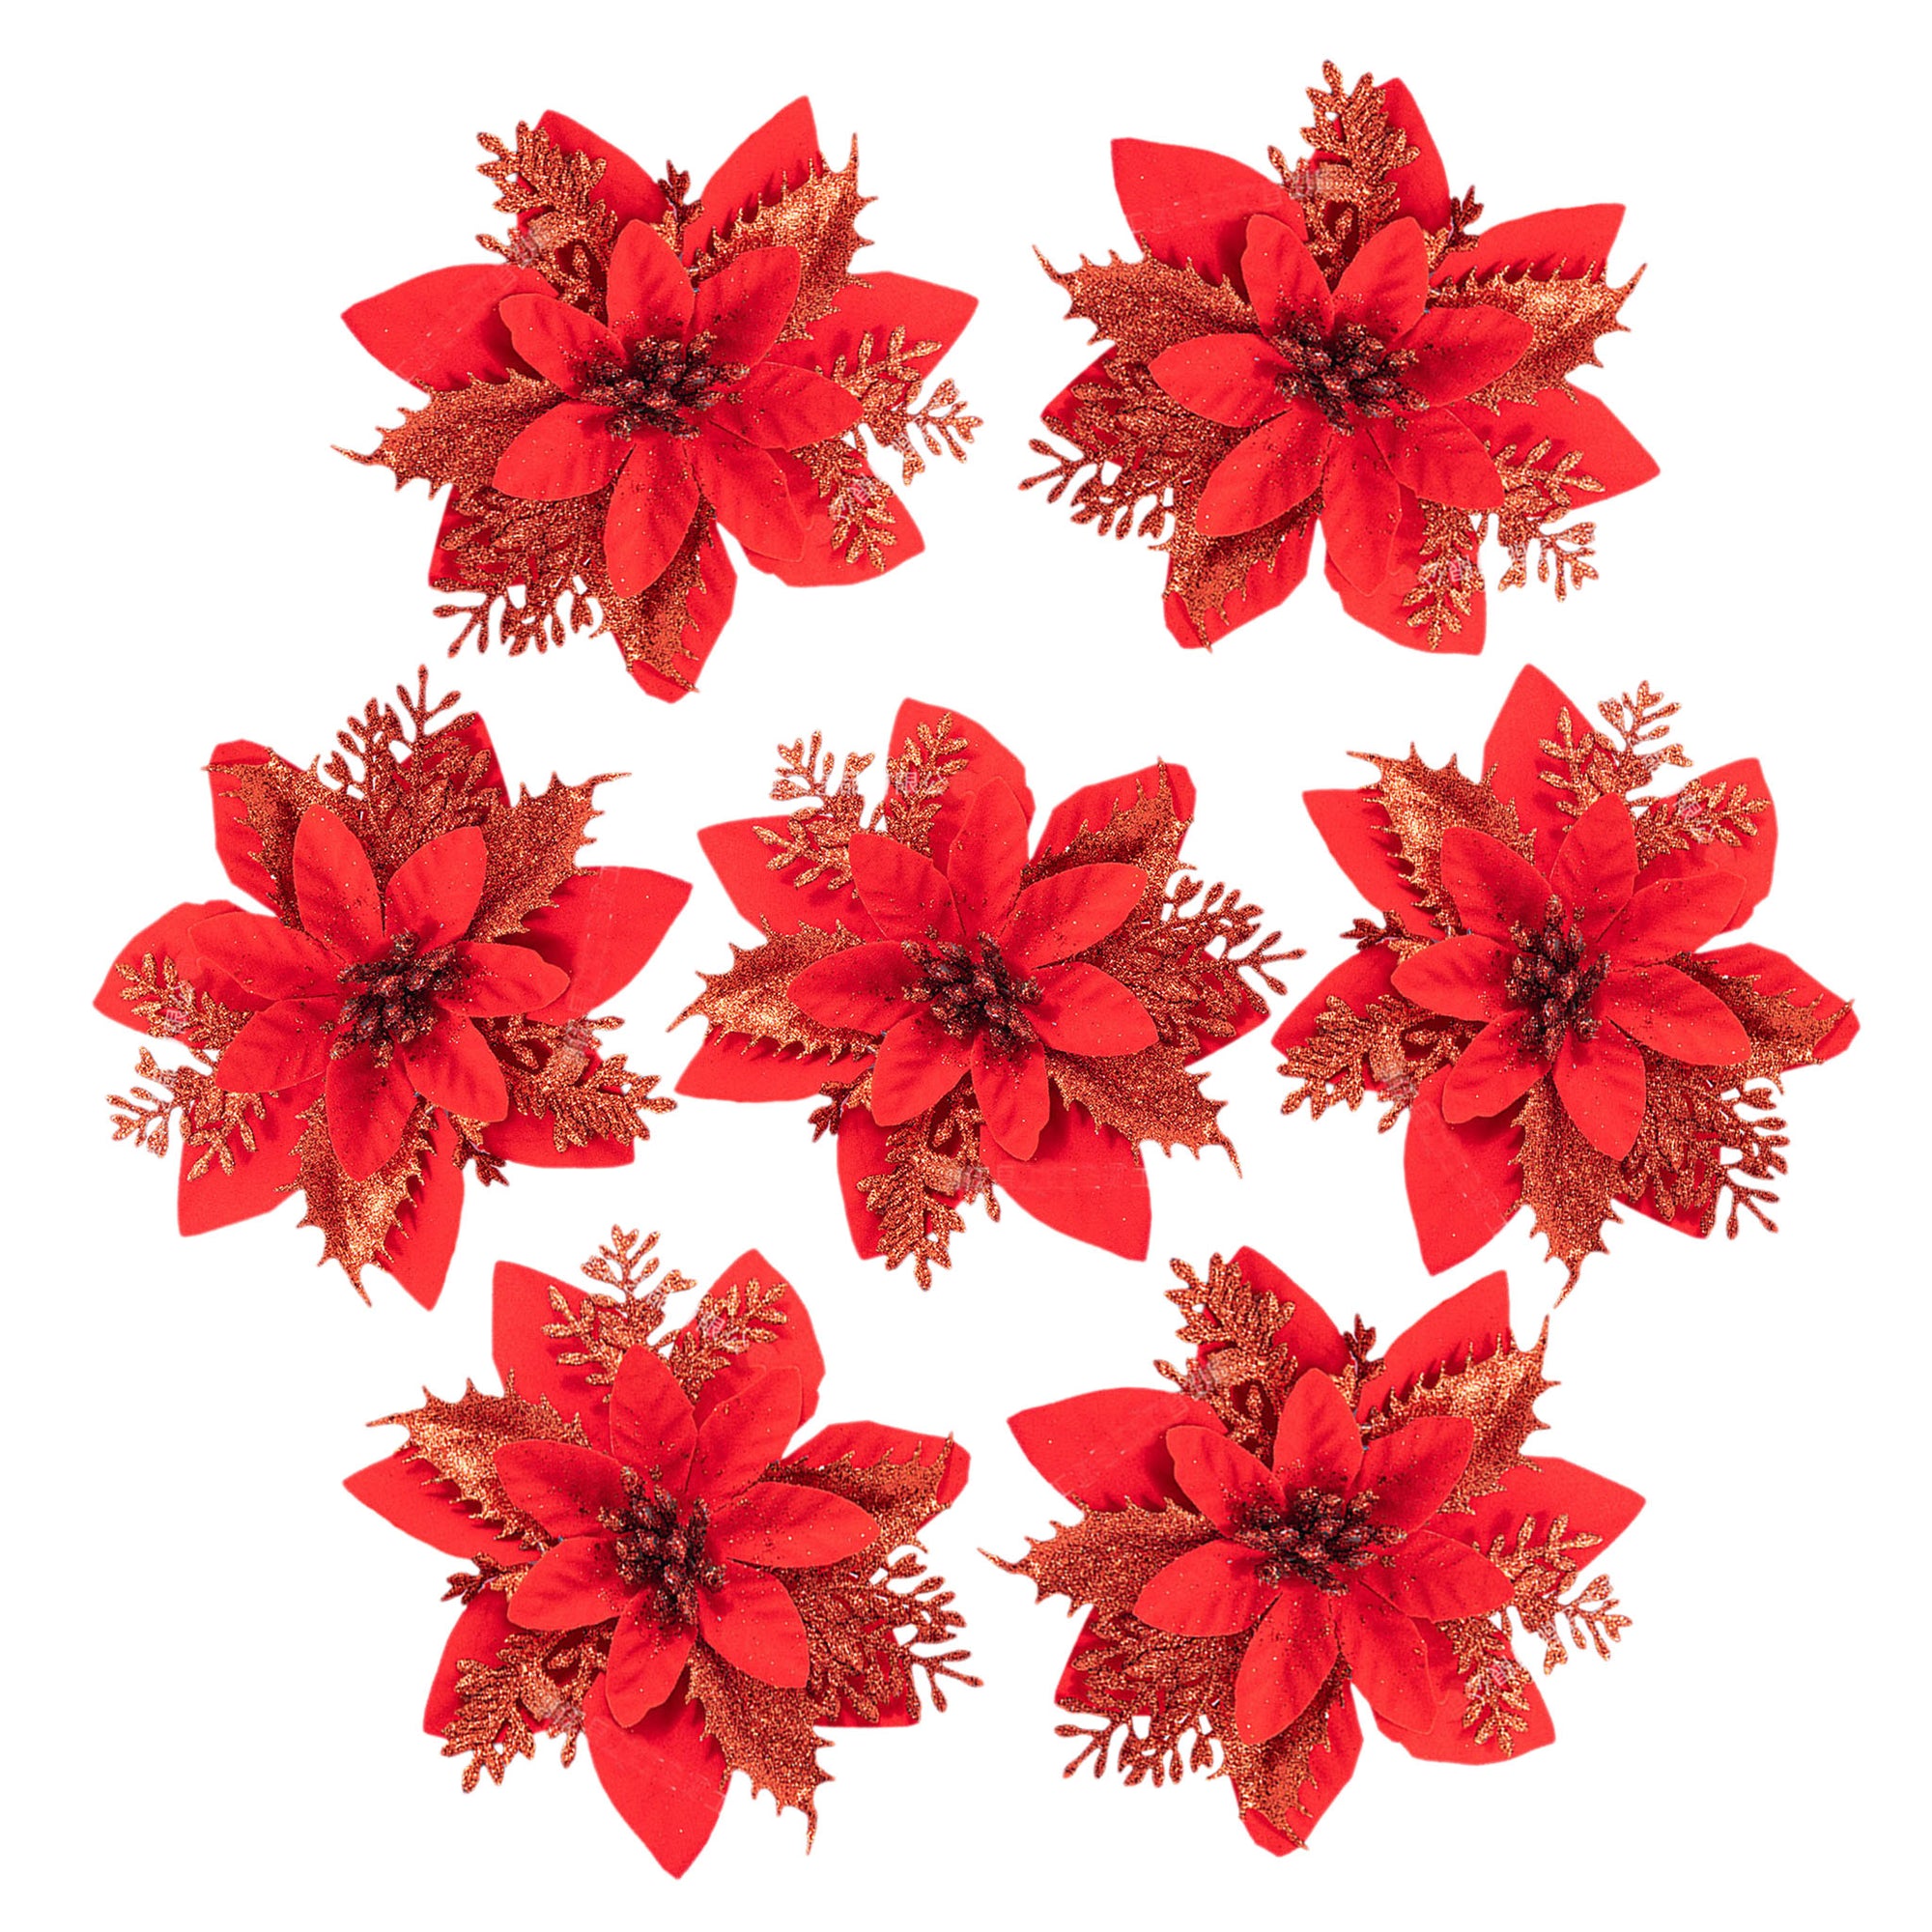 Christmas Flowers Artificial Poinsettia Glitter Decorations Xmas Tree Ornaments